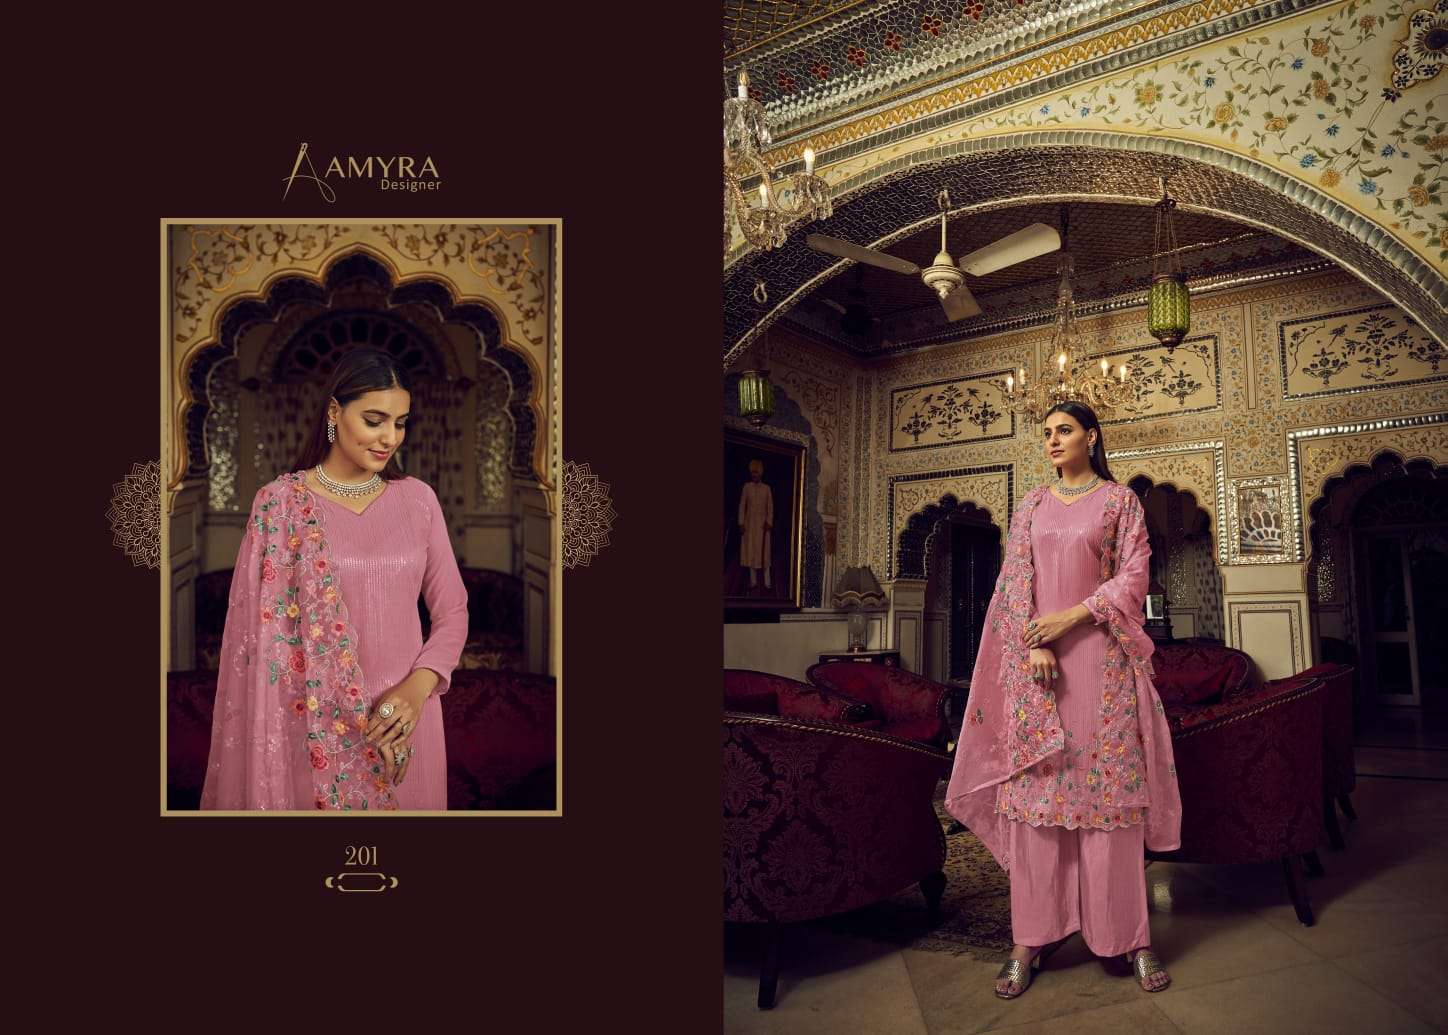 Mariya B By Amyra Designer 201 To 204 Series Beautiful Stylish Sharara Suits Fancy Colorful Casual Wear & Ethnic Wear & Ready To Wear Heavy Georgette Embroidered Dresses At Wholesale Price